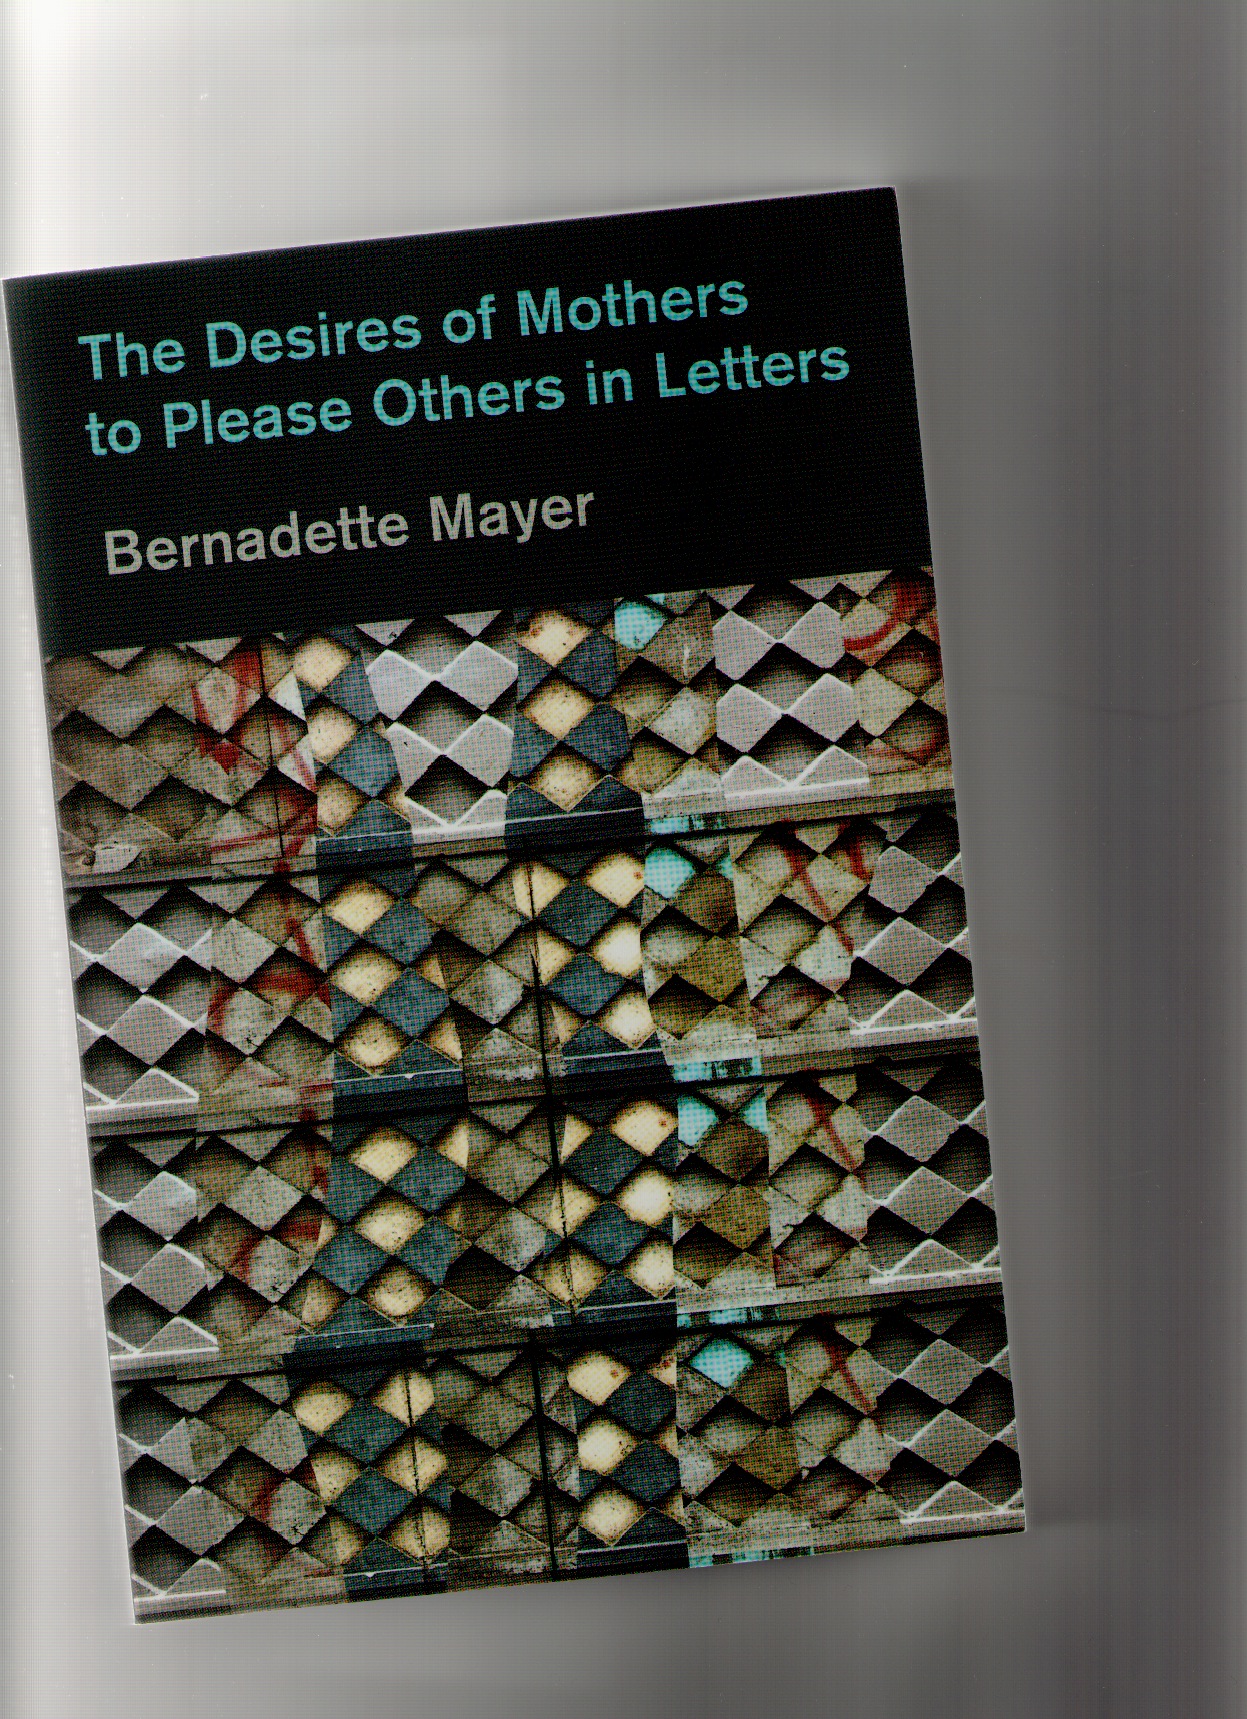 MAYER, Bernadette - The Desire Of Mothers to Please Others in Letters